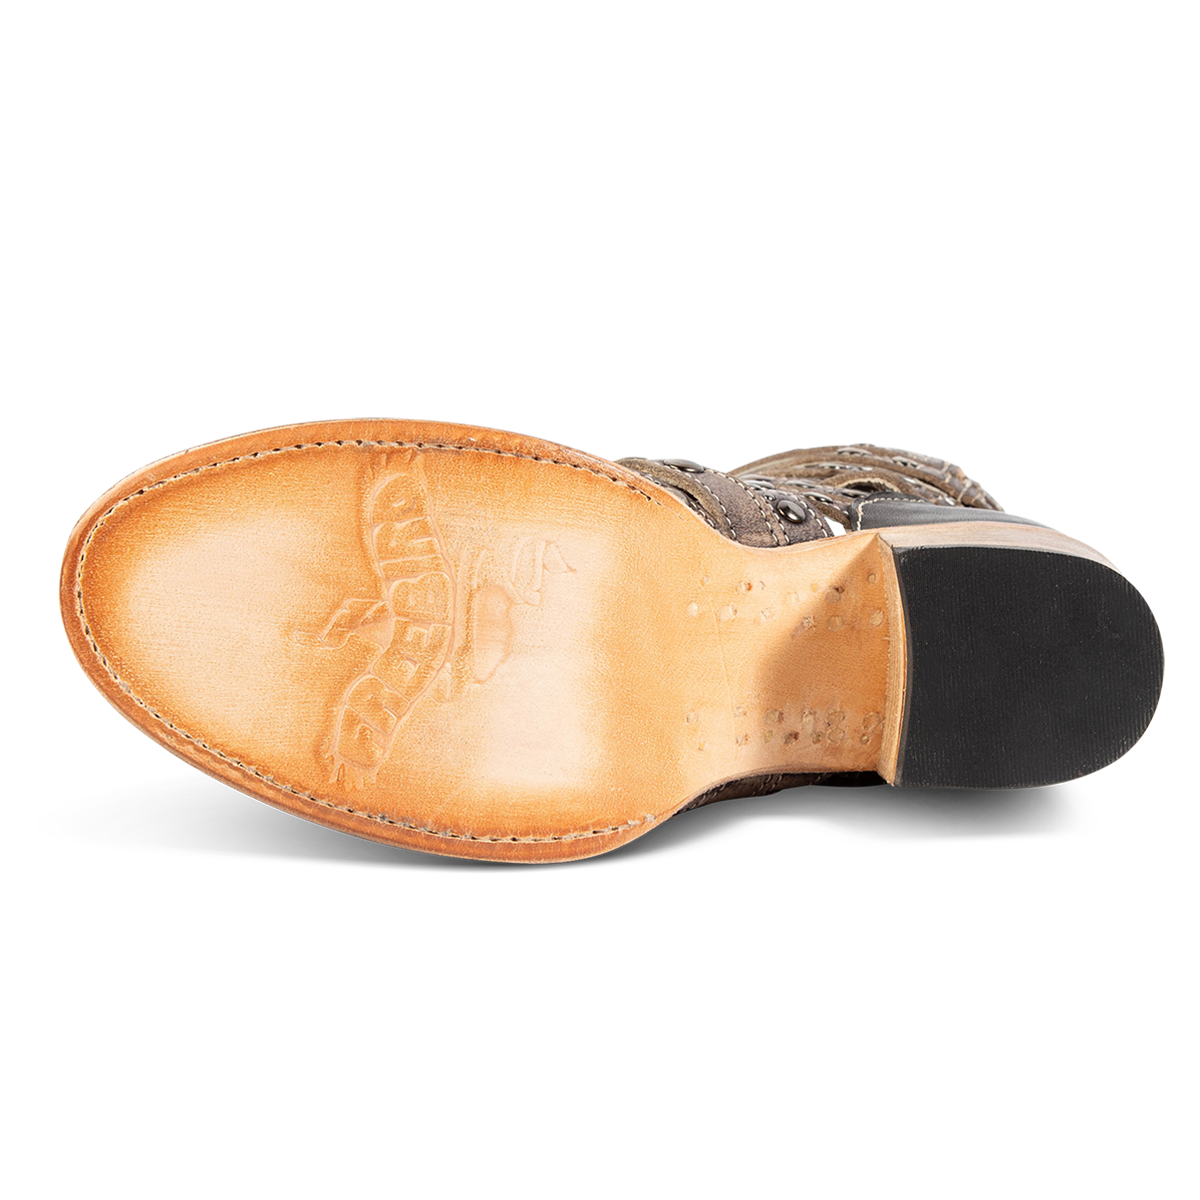 Leather sole imprinted with FREEBIRD on women's Cannes black distressed leather sandal